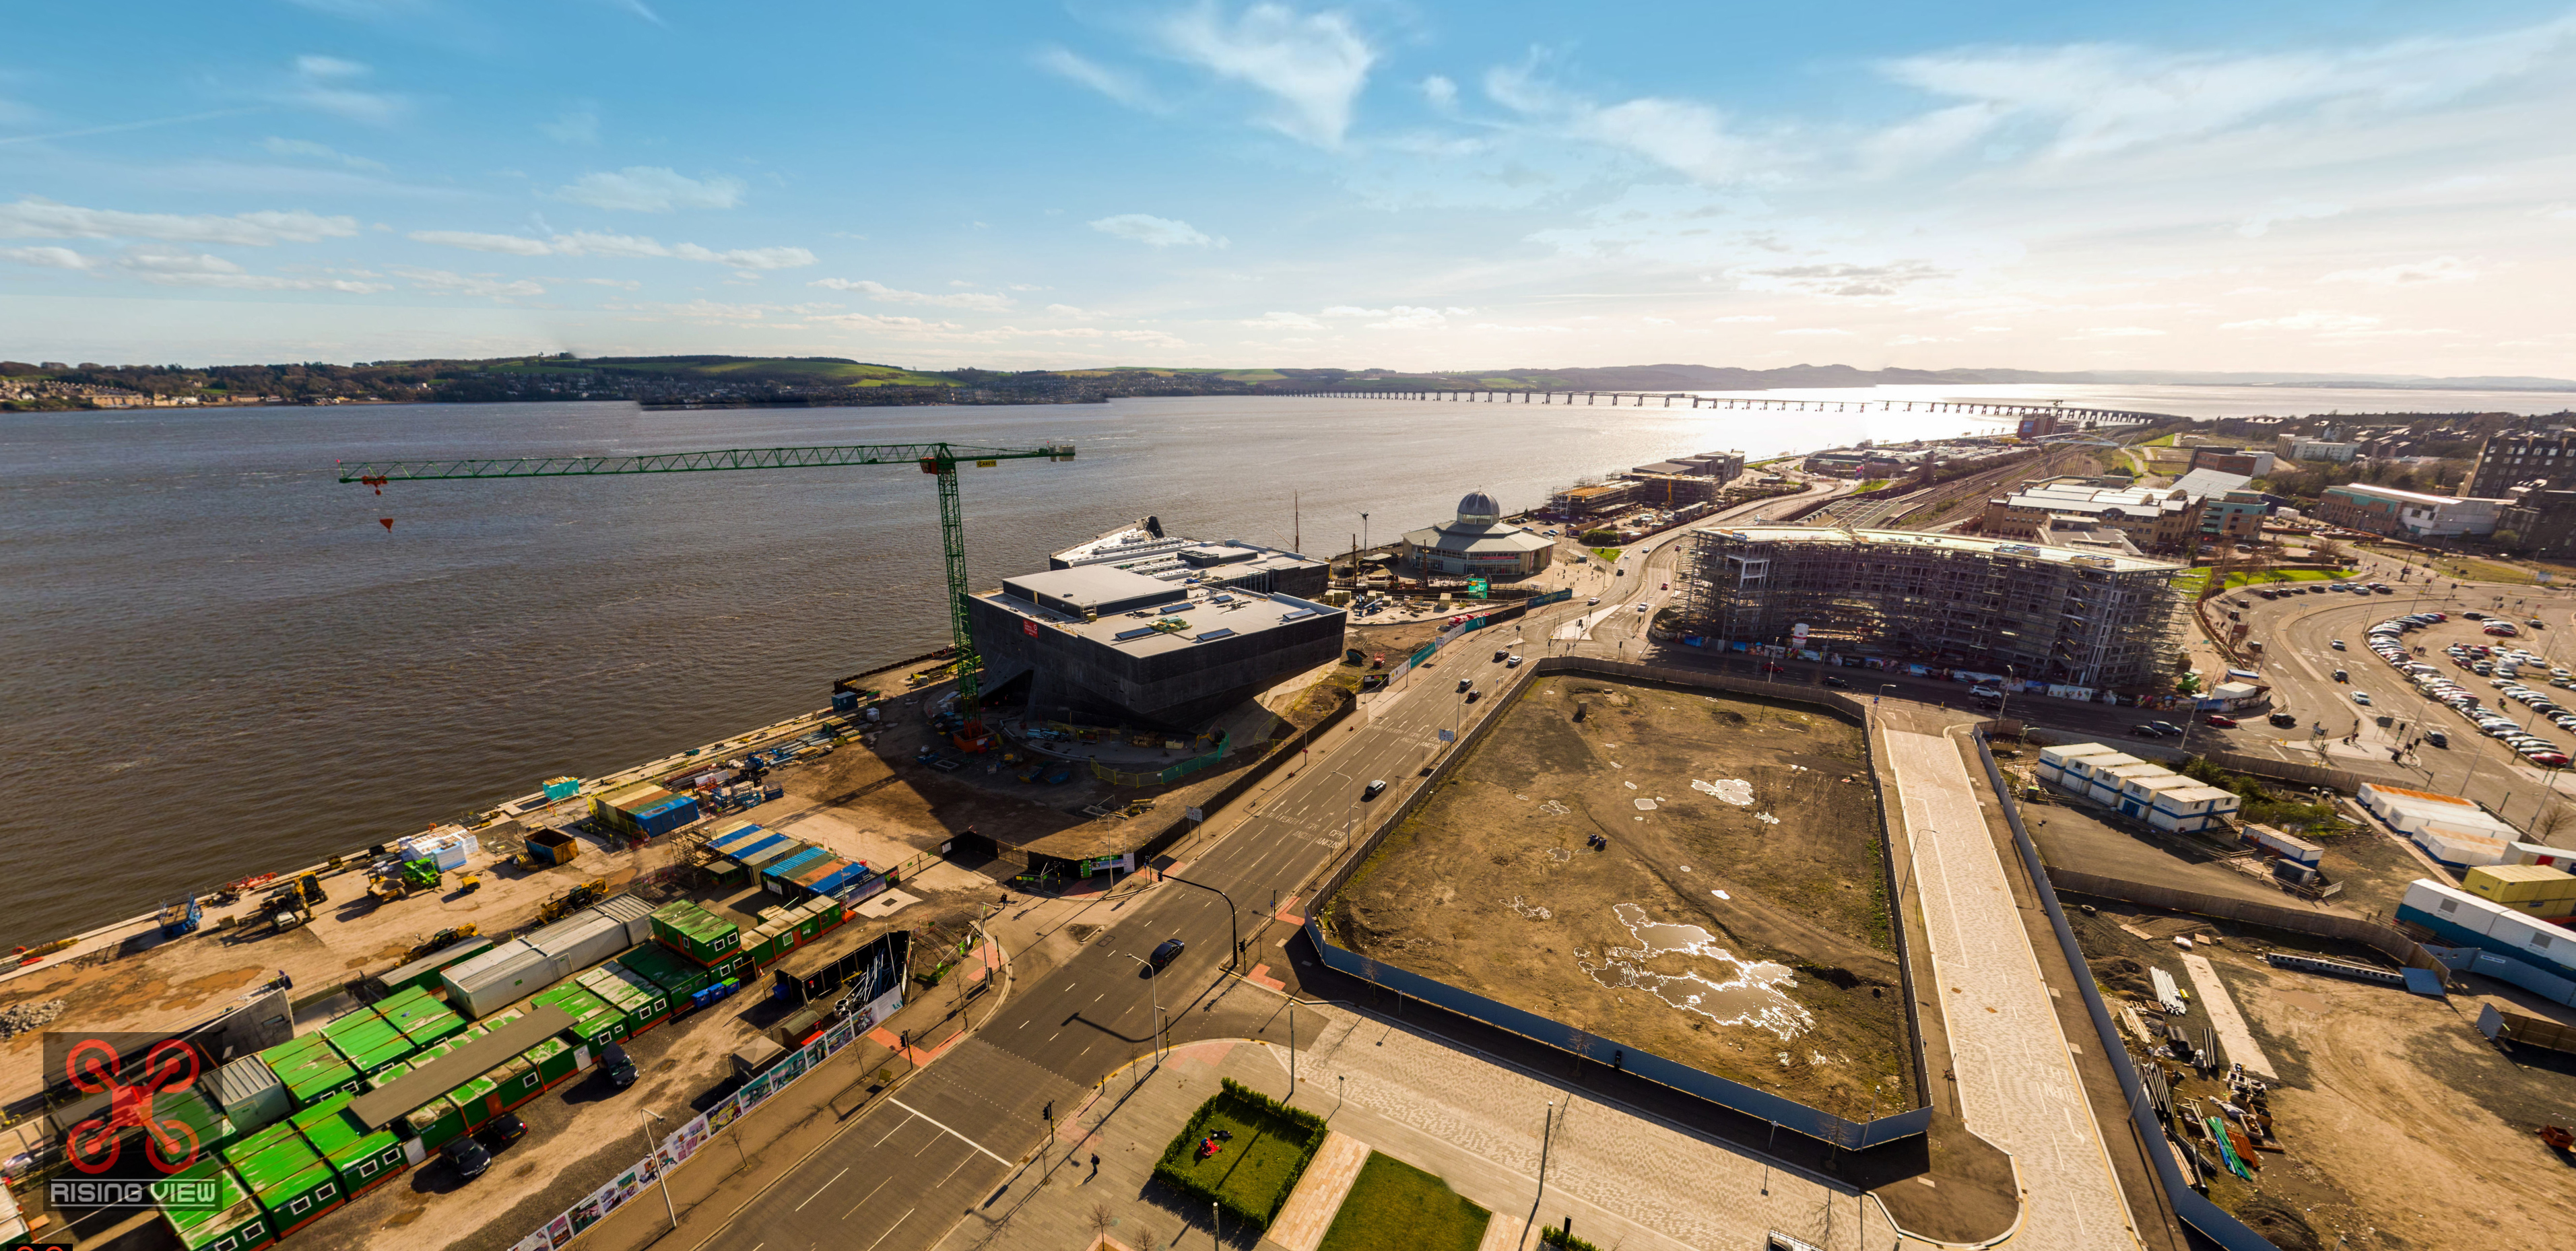 In photos: New aerial shots show Dundee waterfront and V&A taking shape - The Courier